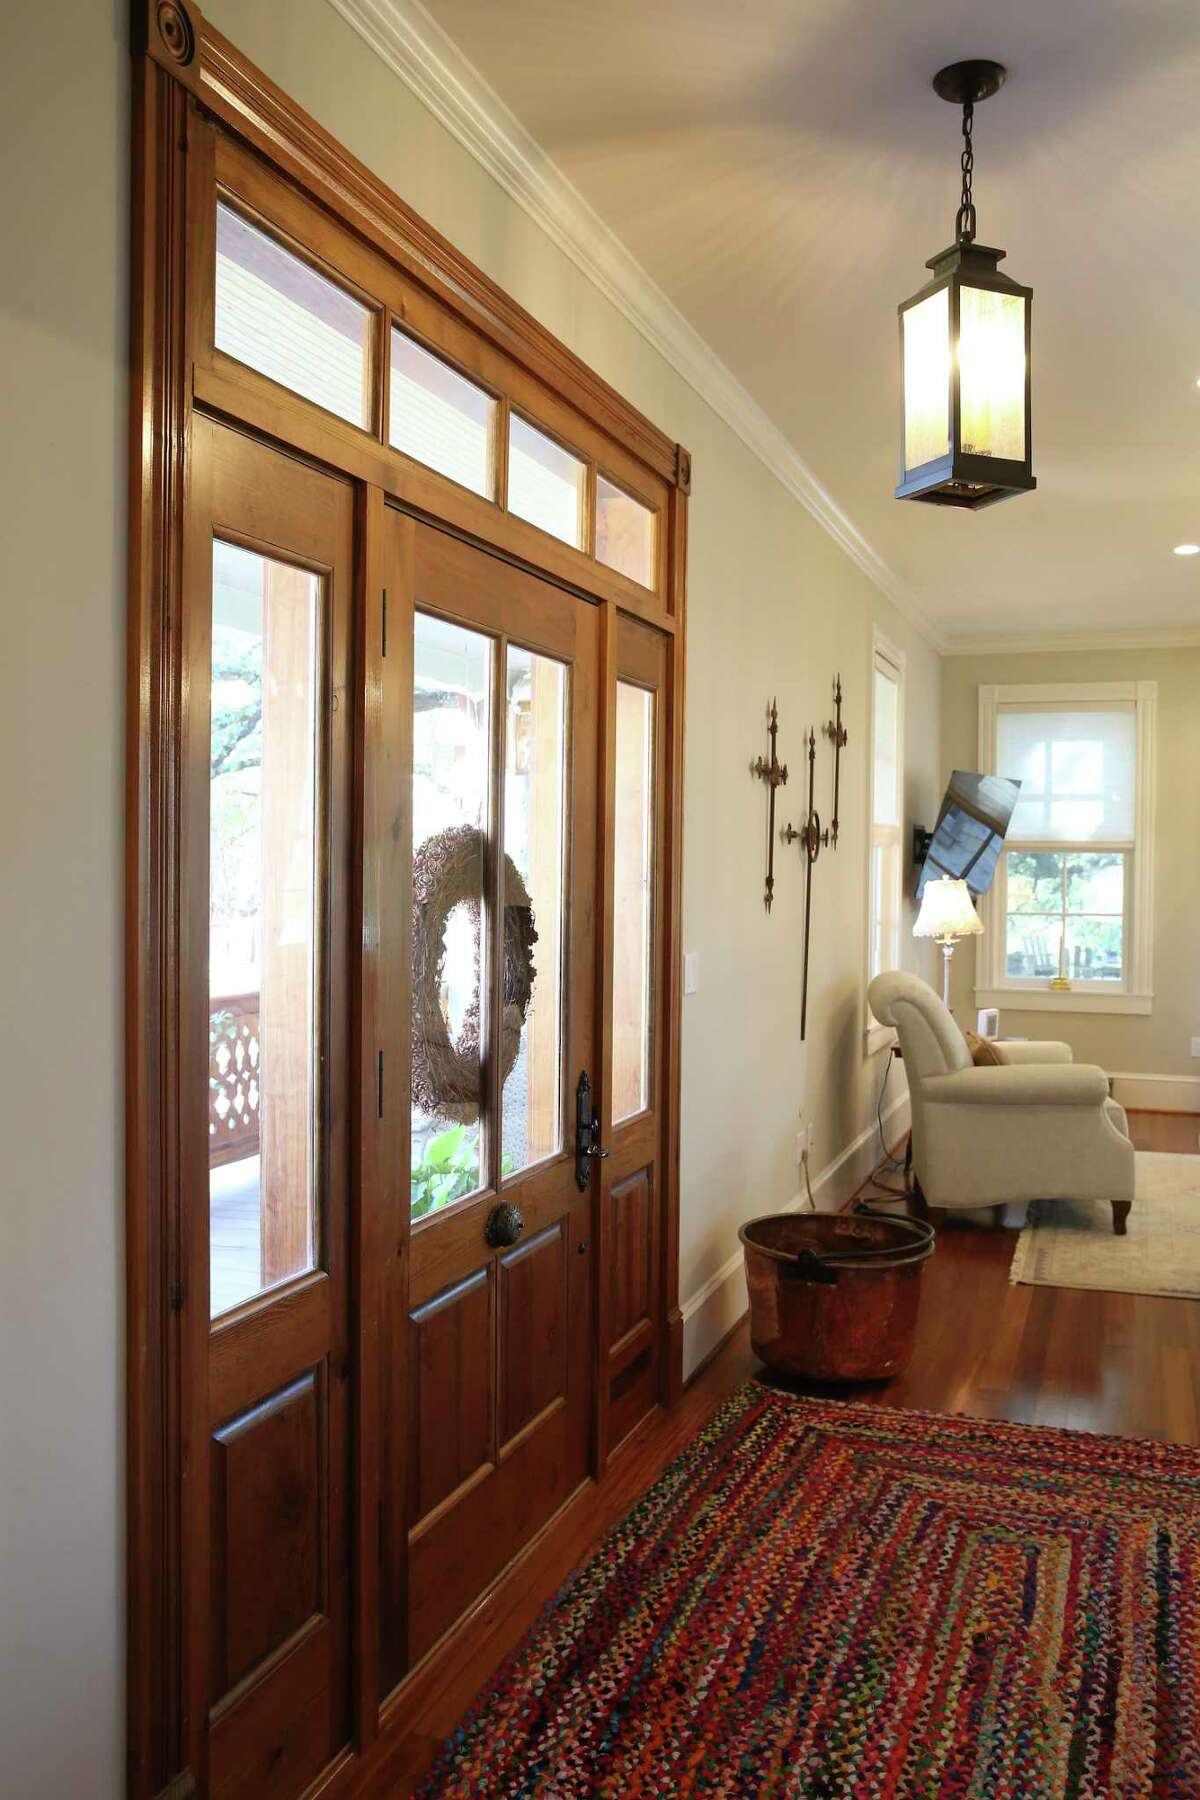 The front door, trim and flooring are made from reclaimed longleaf pine.